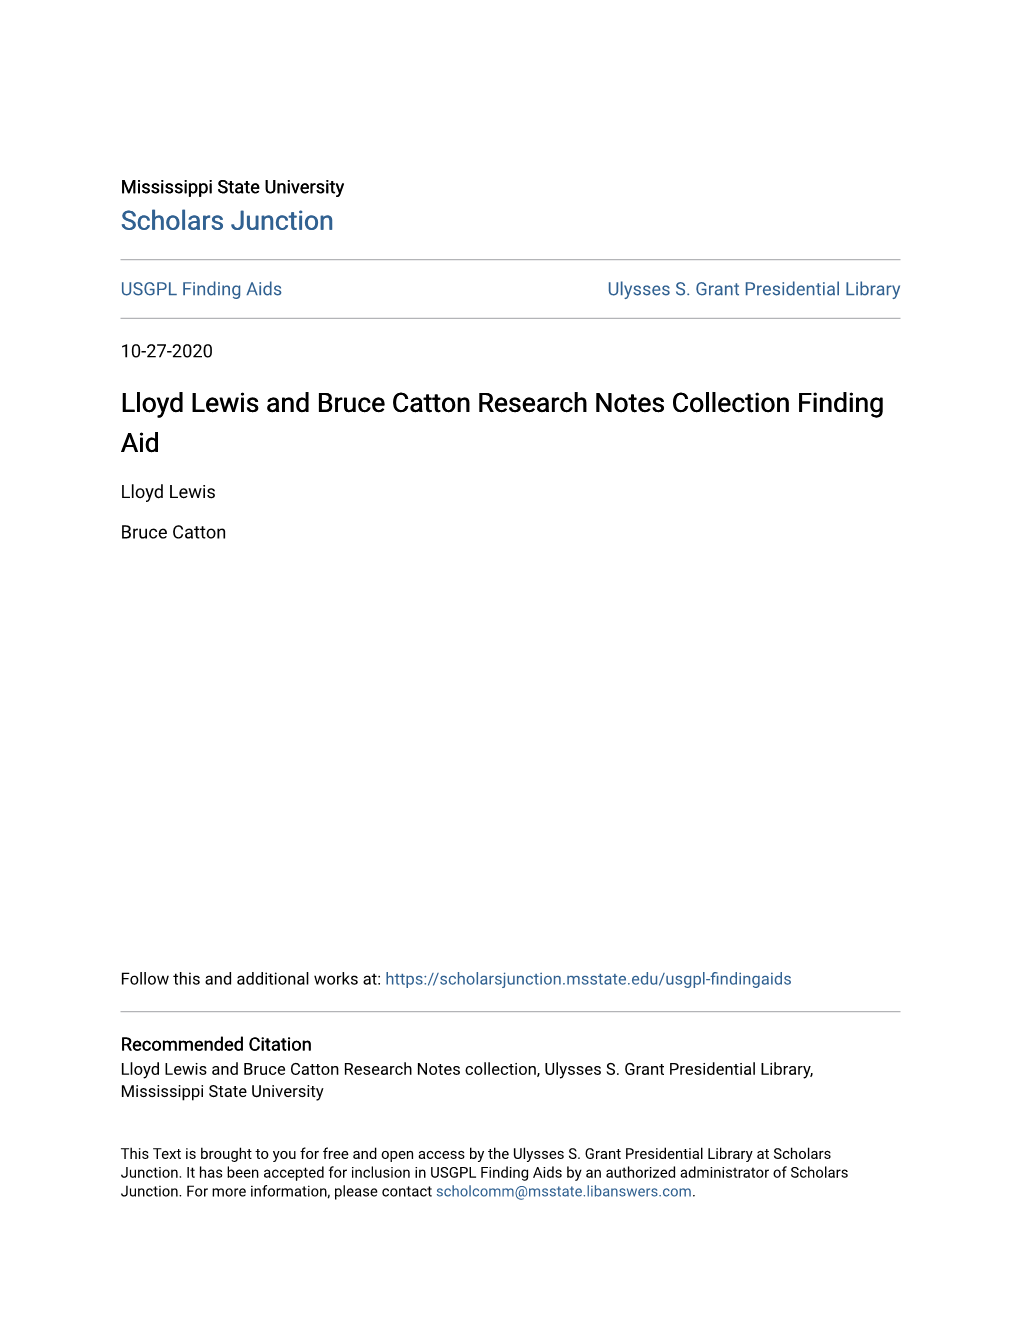 Lloyd Lewis and Bruce Catton Research Notes Collection Finding Aid